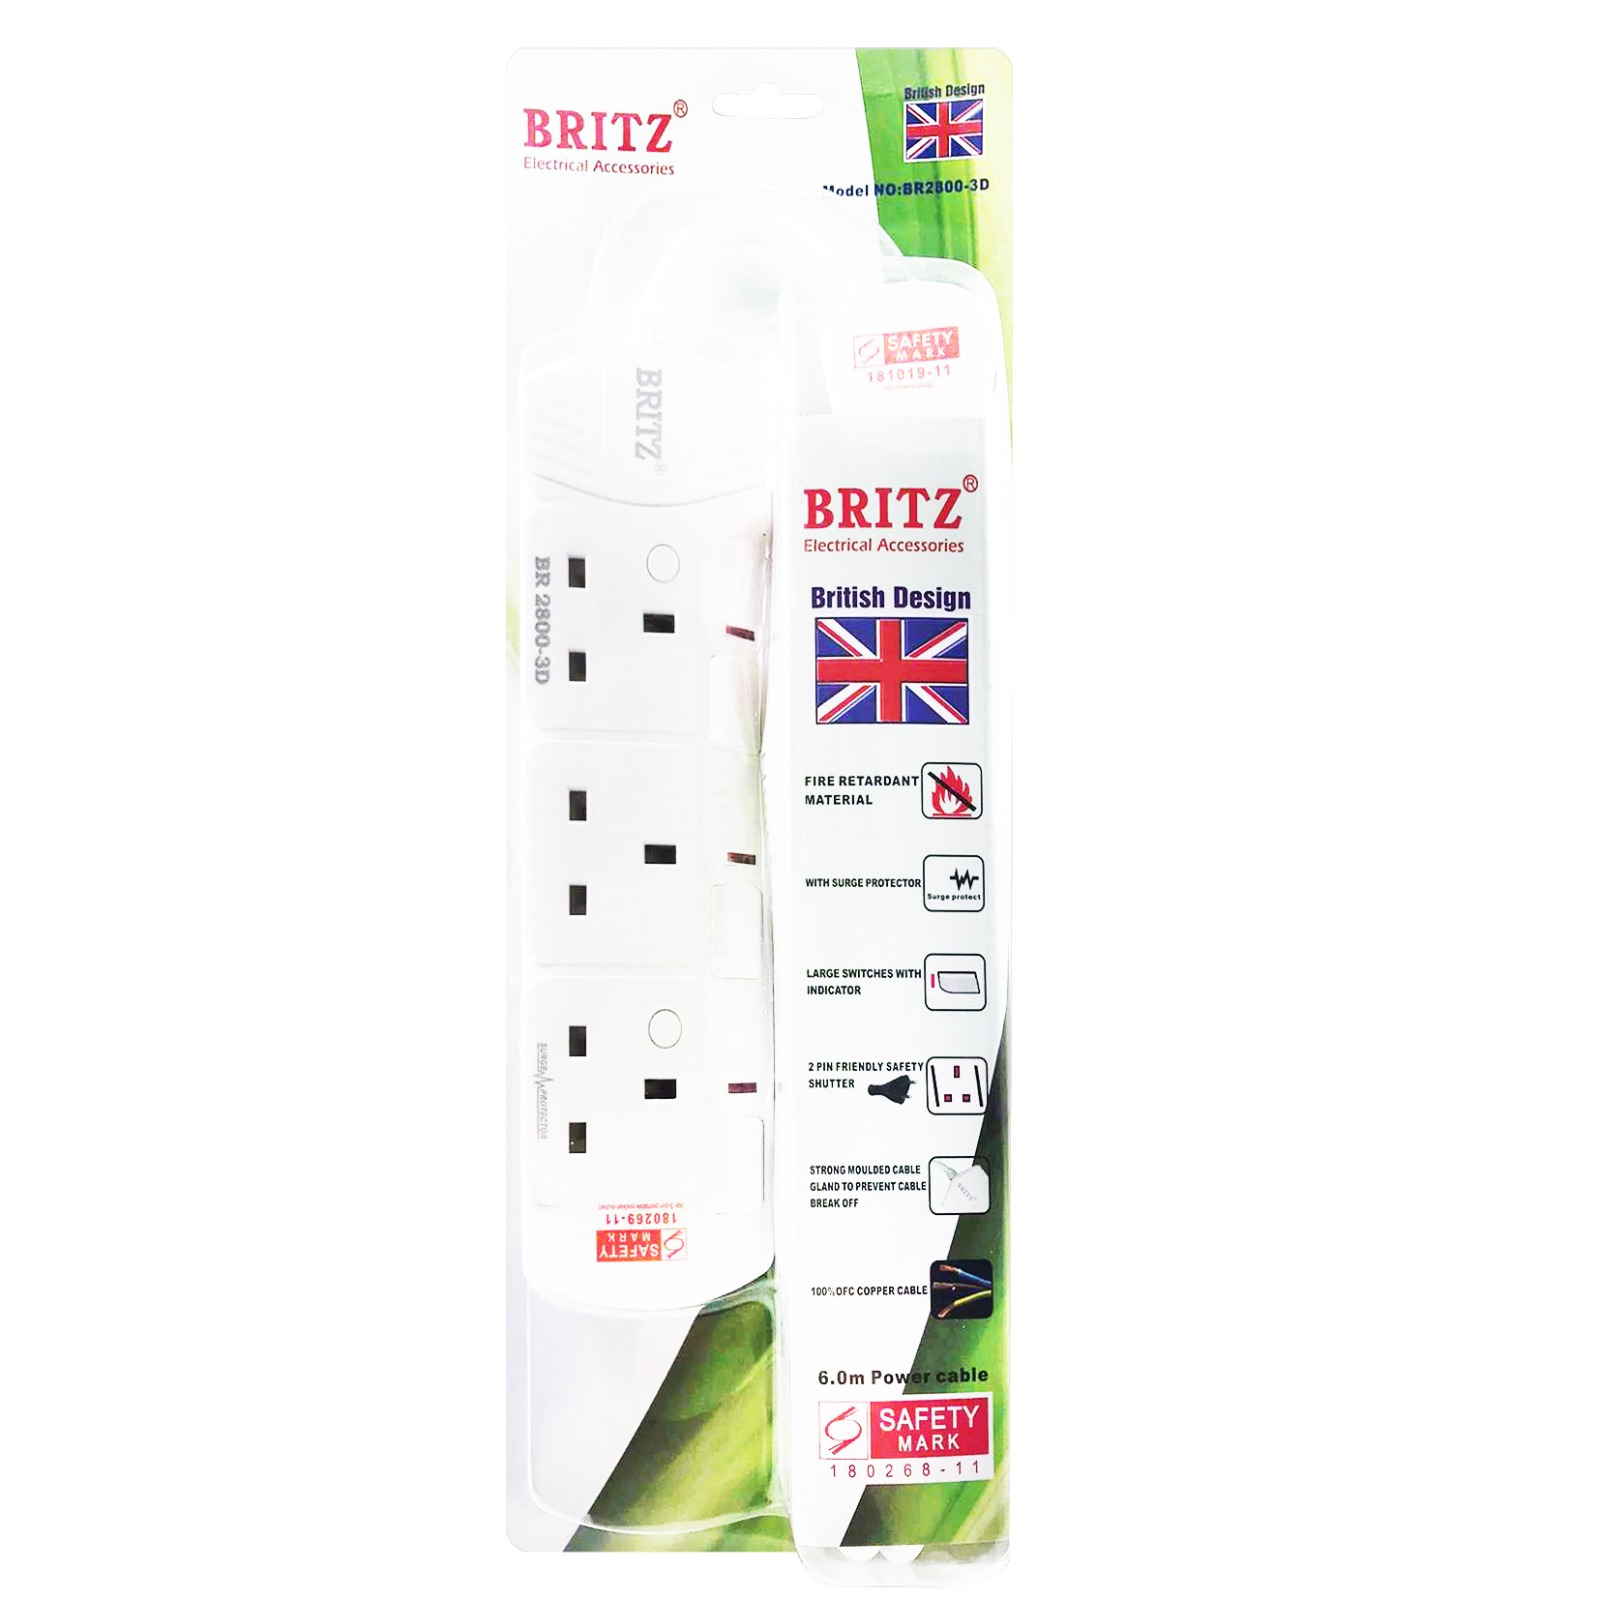 Britz 3 Gang 6M Extension Cable Comes With Surge Protector